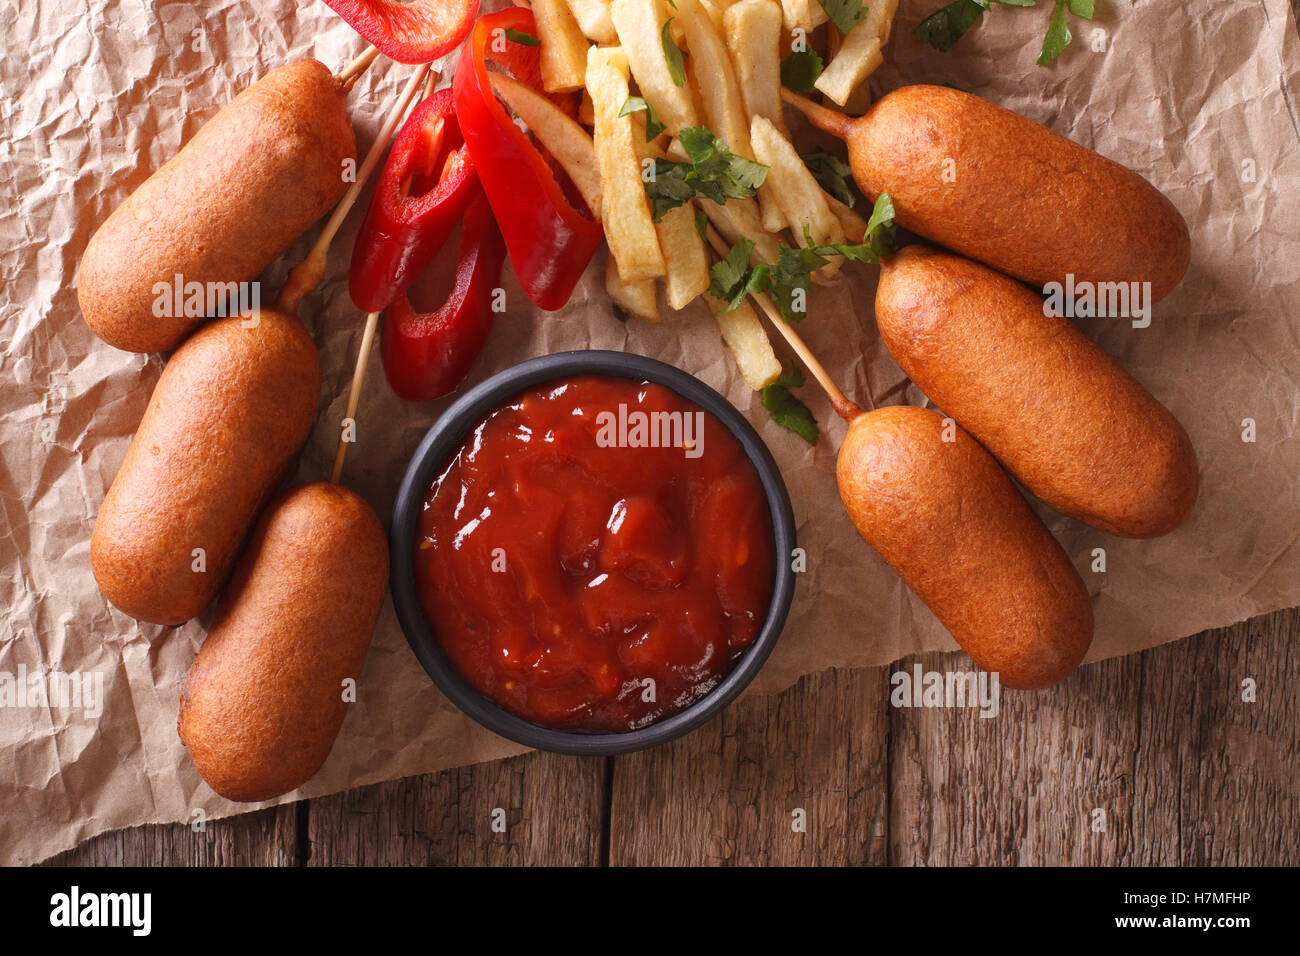 Fast Food: Corn dogs, french fries and ketchup on the table close-up. horizontal view from above Stock Photo